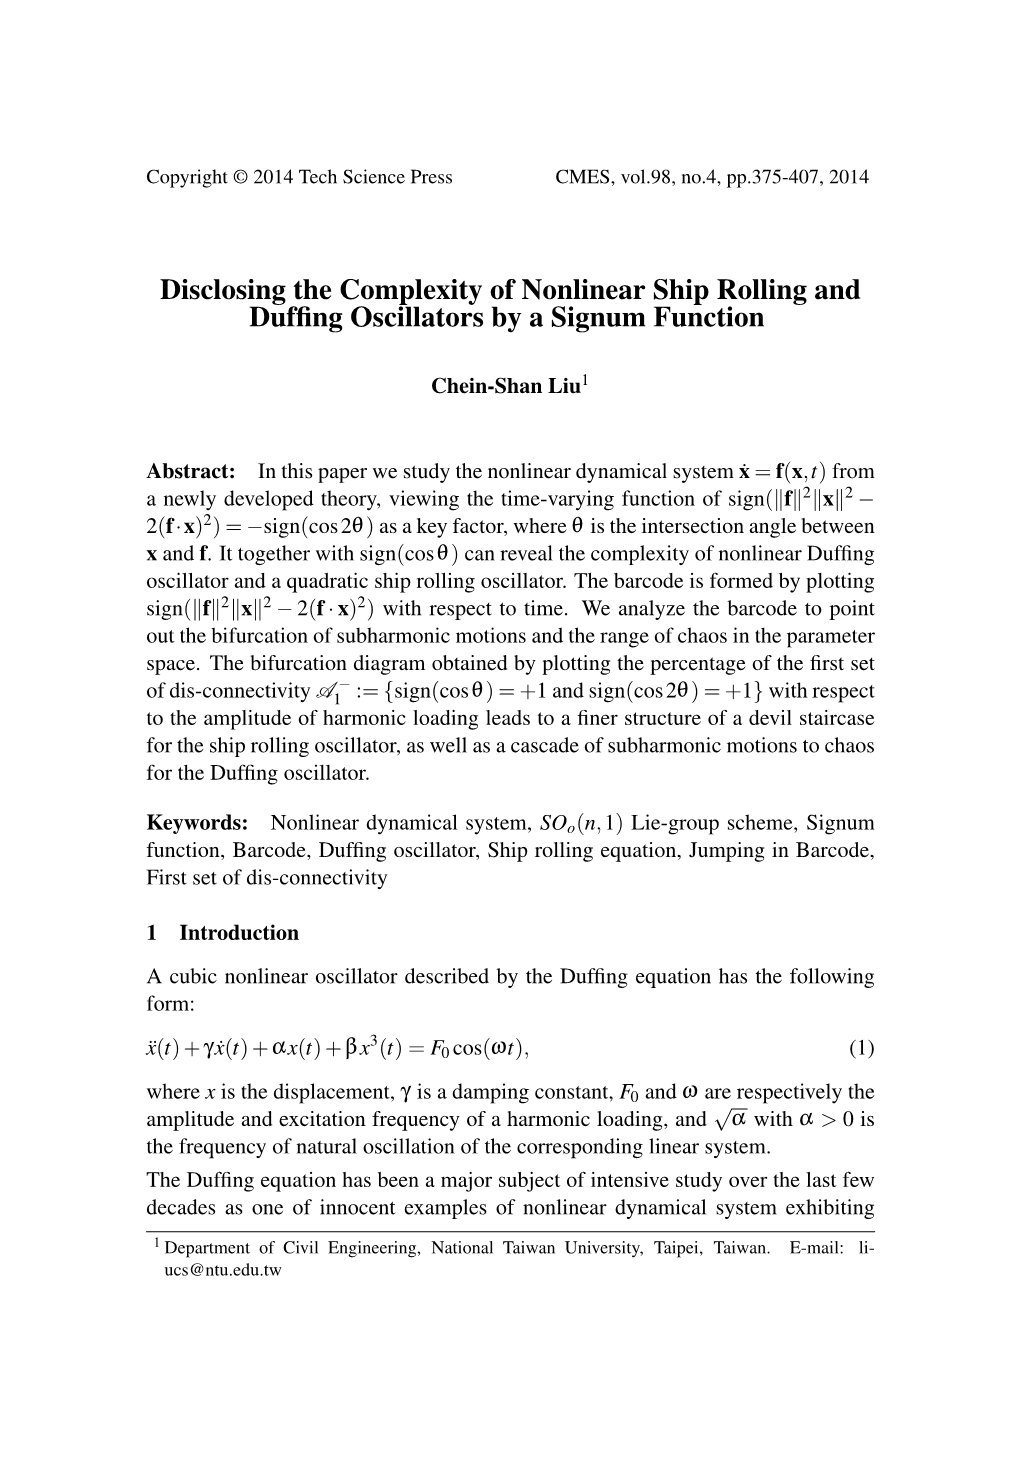 Disclosing the Complexity of Nonlinear Ship Rolling and Duffing